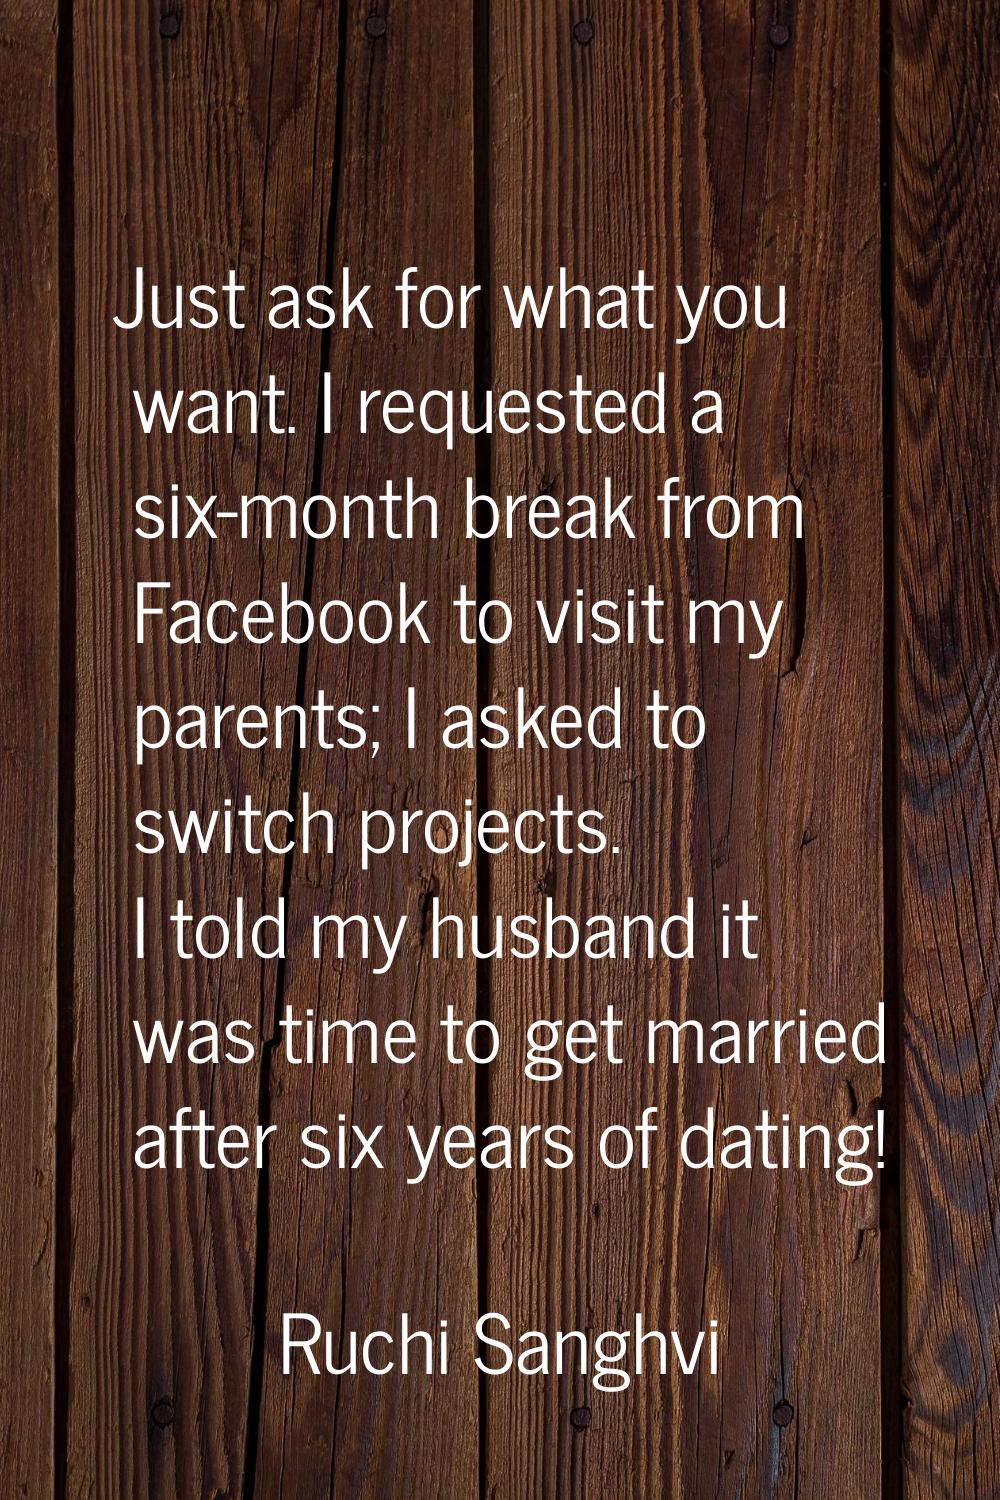 Just ask for what you want. I requested a six-month break from Facebook to visit my parents; I aske